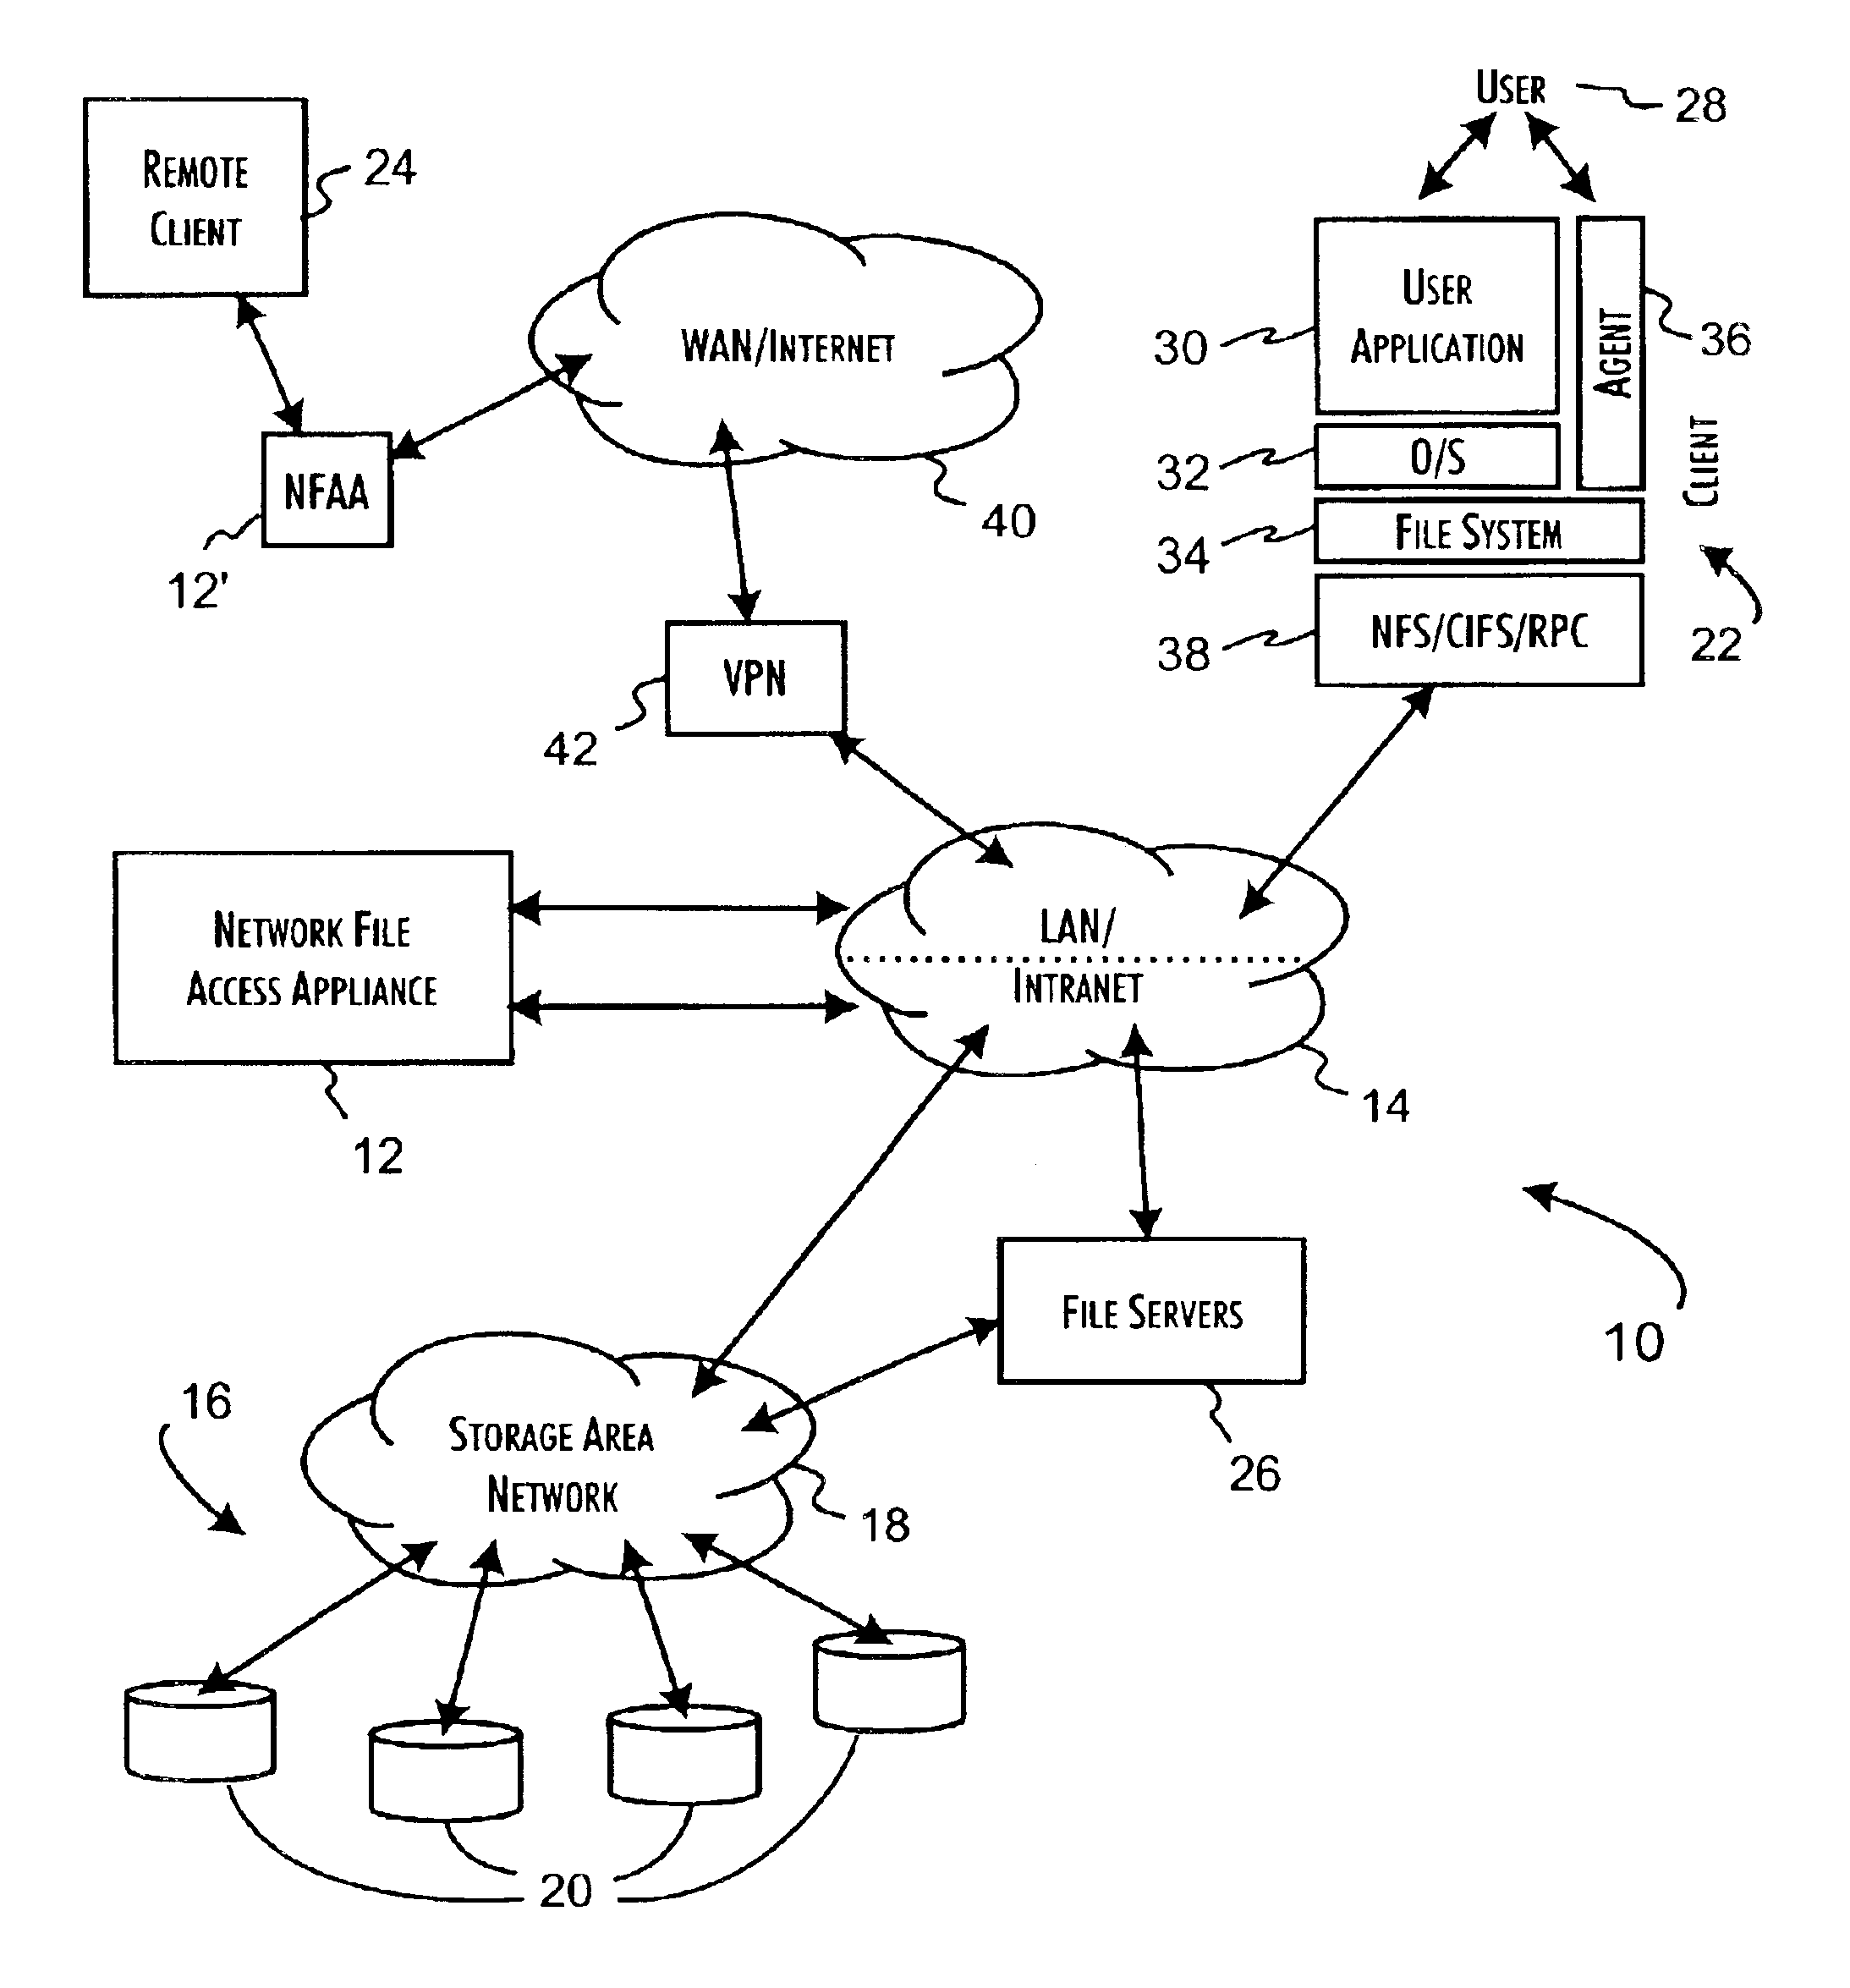 Secure network file access controller implementing access control and auditing